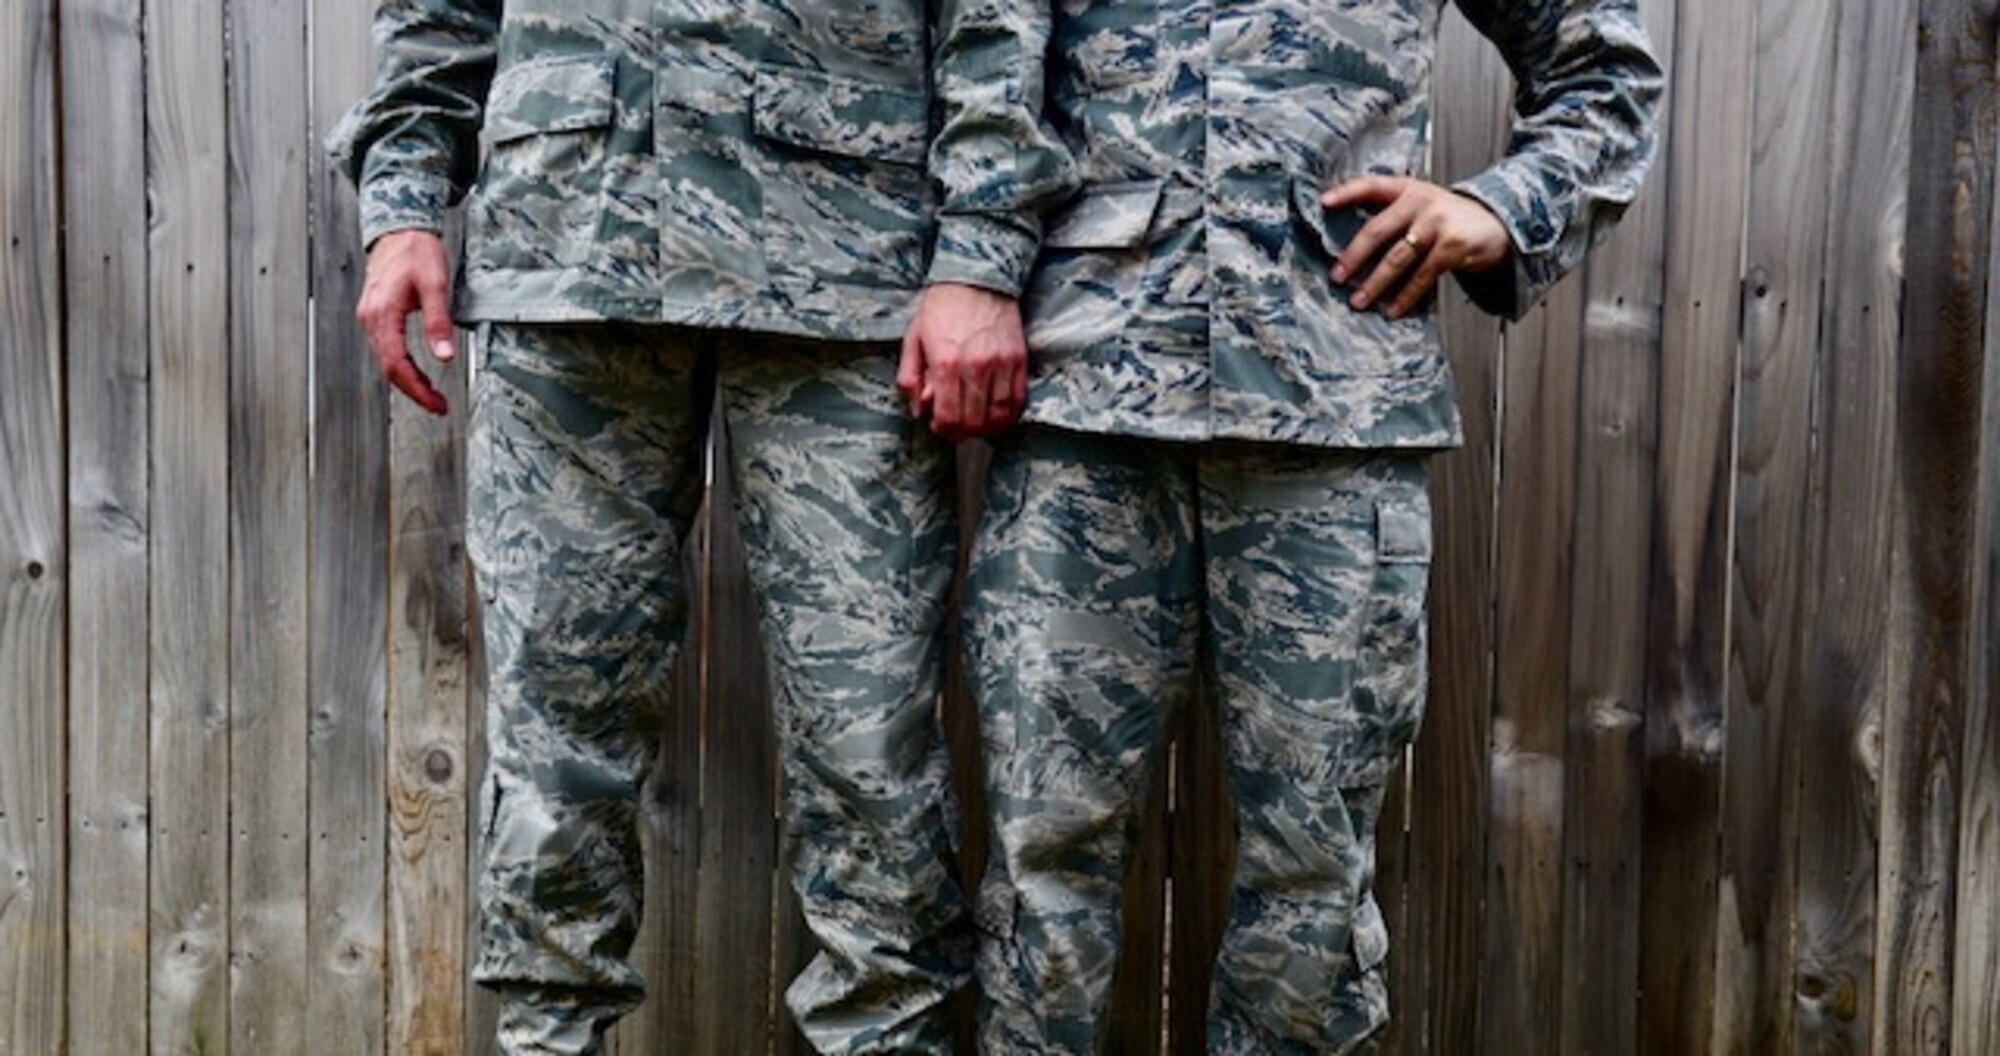 U.S. Air Force Staff Sgts. Alexx and Chip Pons, who serve separate commands as photojournalists at Joint Base San Antonio, Randolph, Texas, stand united as a married, dual-military, same sex couple. Since the repeal of Don’t Ask, Don’t Tell in 2011 and the legalization of same-sex marriage in 2015, the two have been able to serve openly with the support of their Air Force family. (U.S. Air Force photo by Staff Sgt. Alexx Pons)